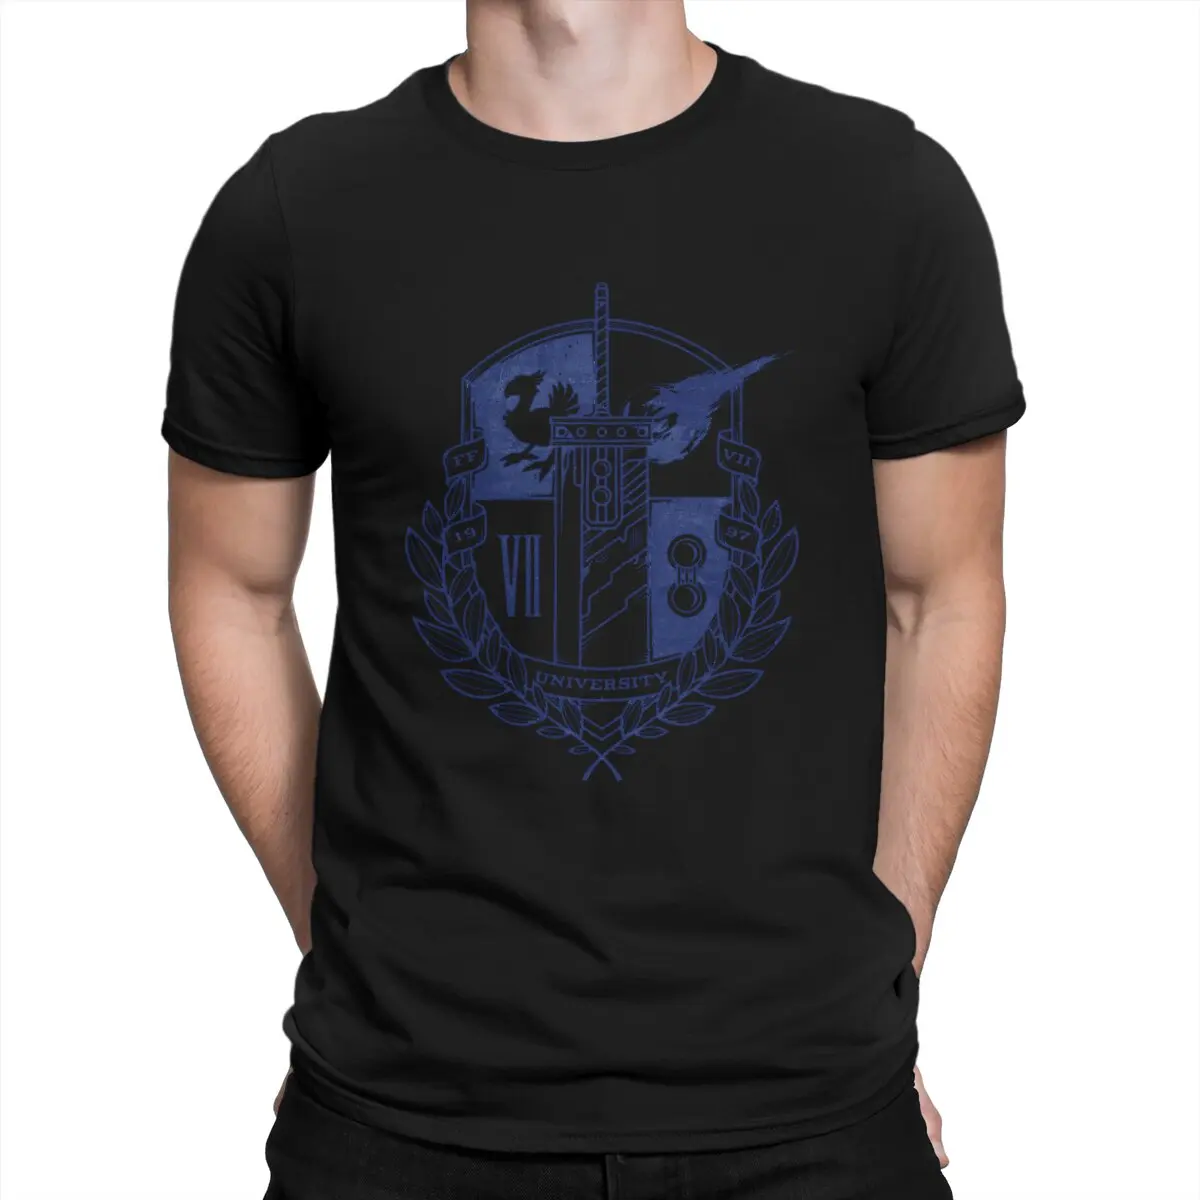 

University Special TShirt Final Fantasy A Brave Man to Send Leisure T Shirt Summer T-shirt For Adult